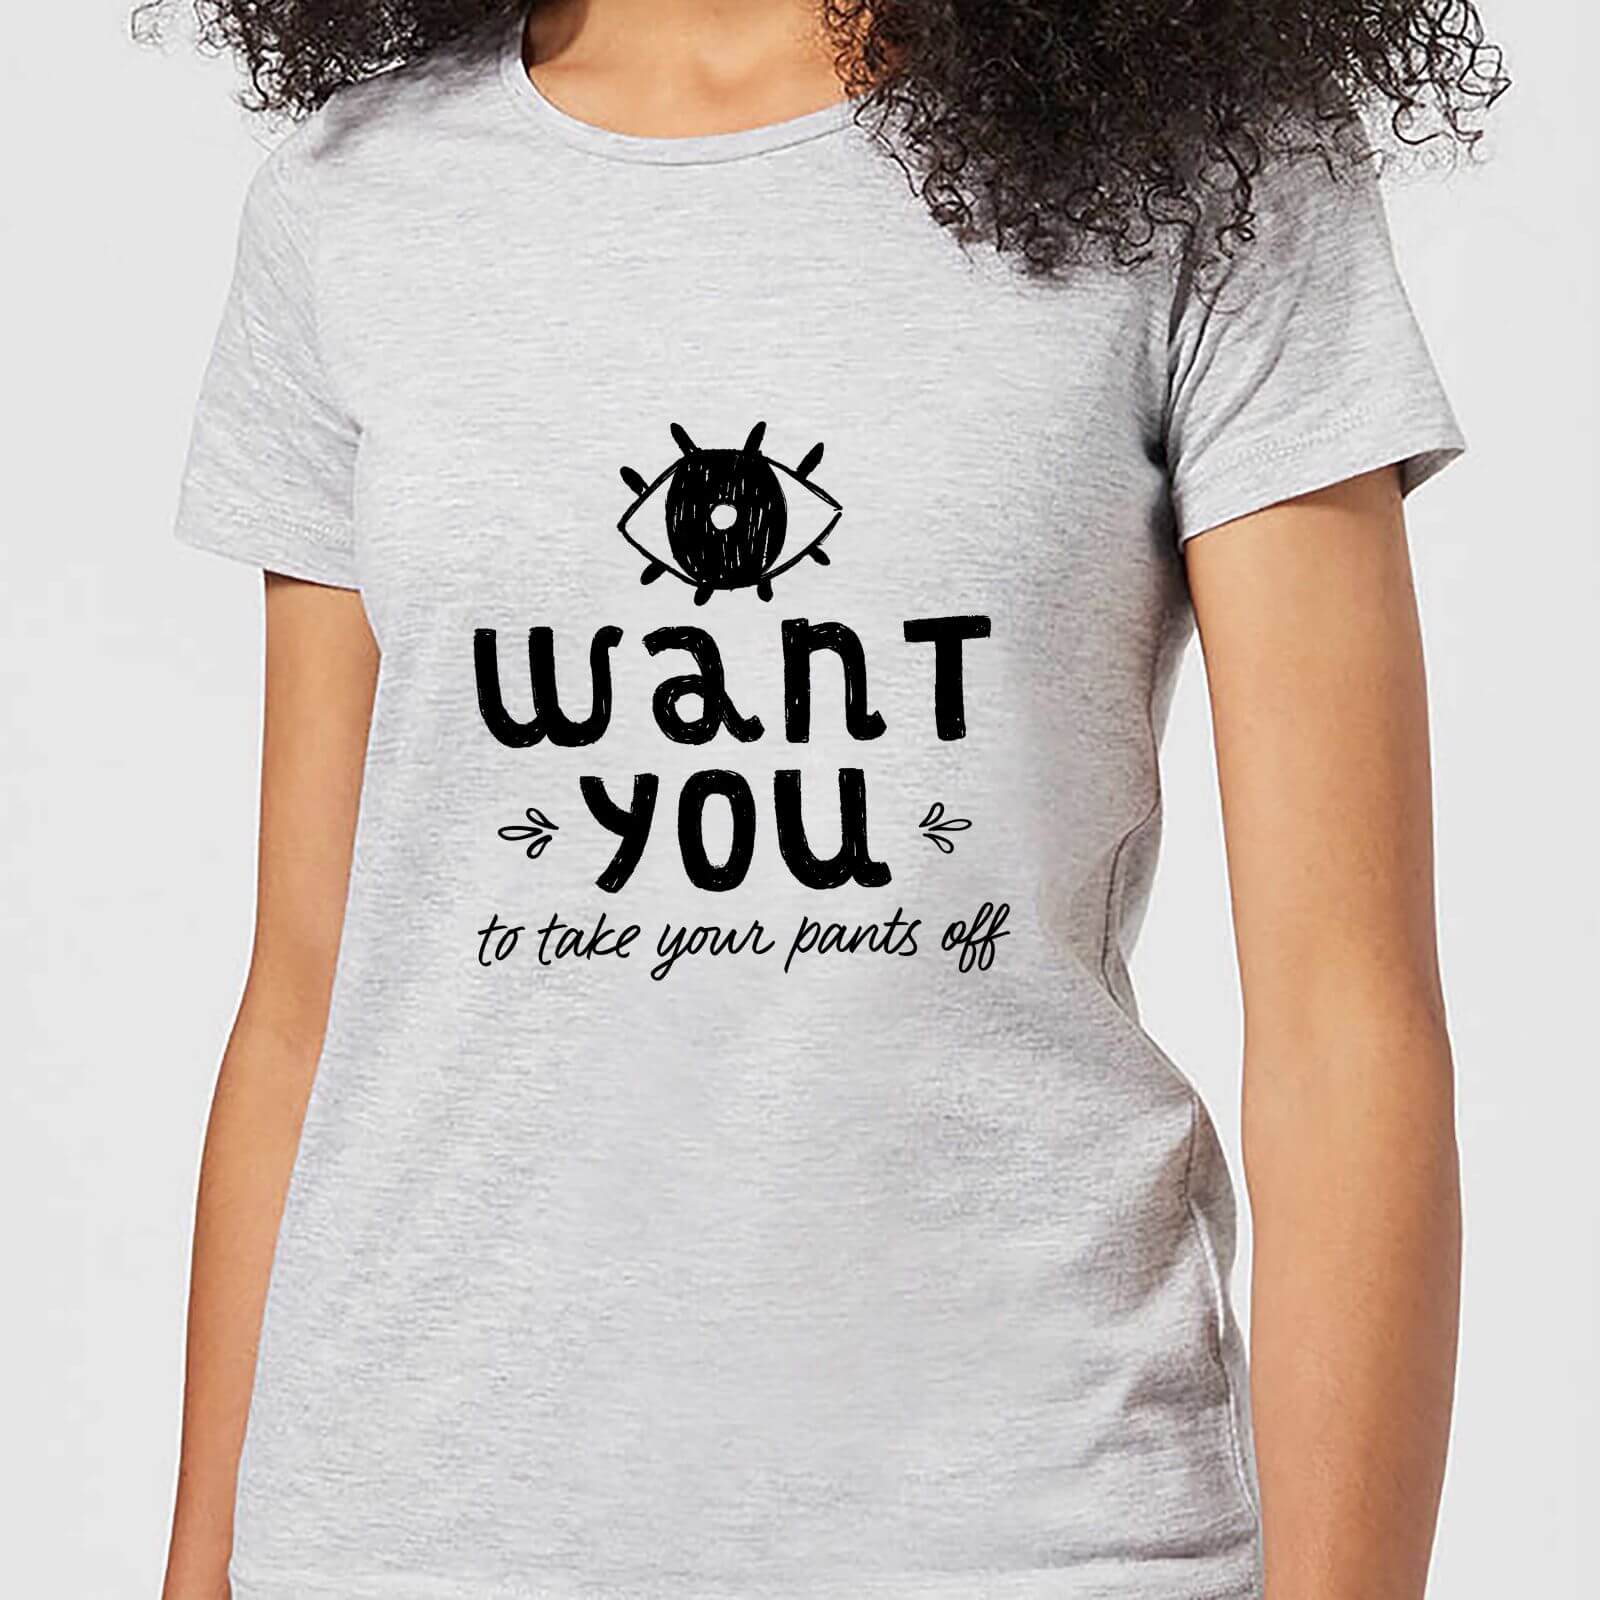 I Want You To Take Your Pants Off Women's T-Shirt - Grey - 5Xl - Grey